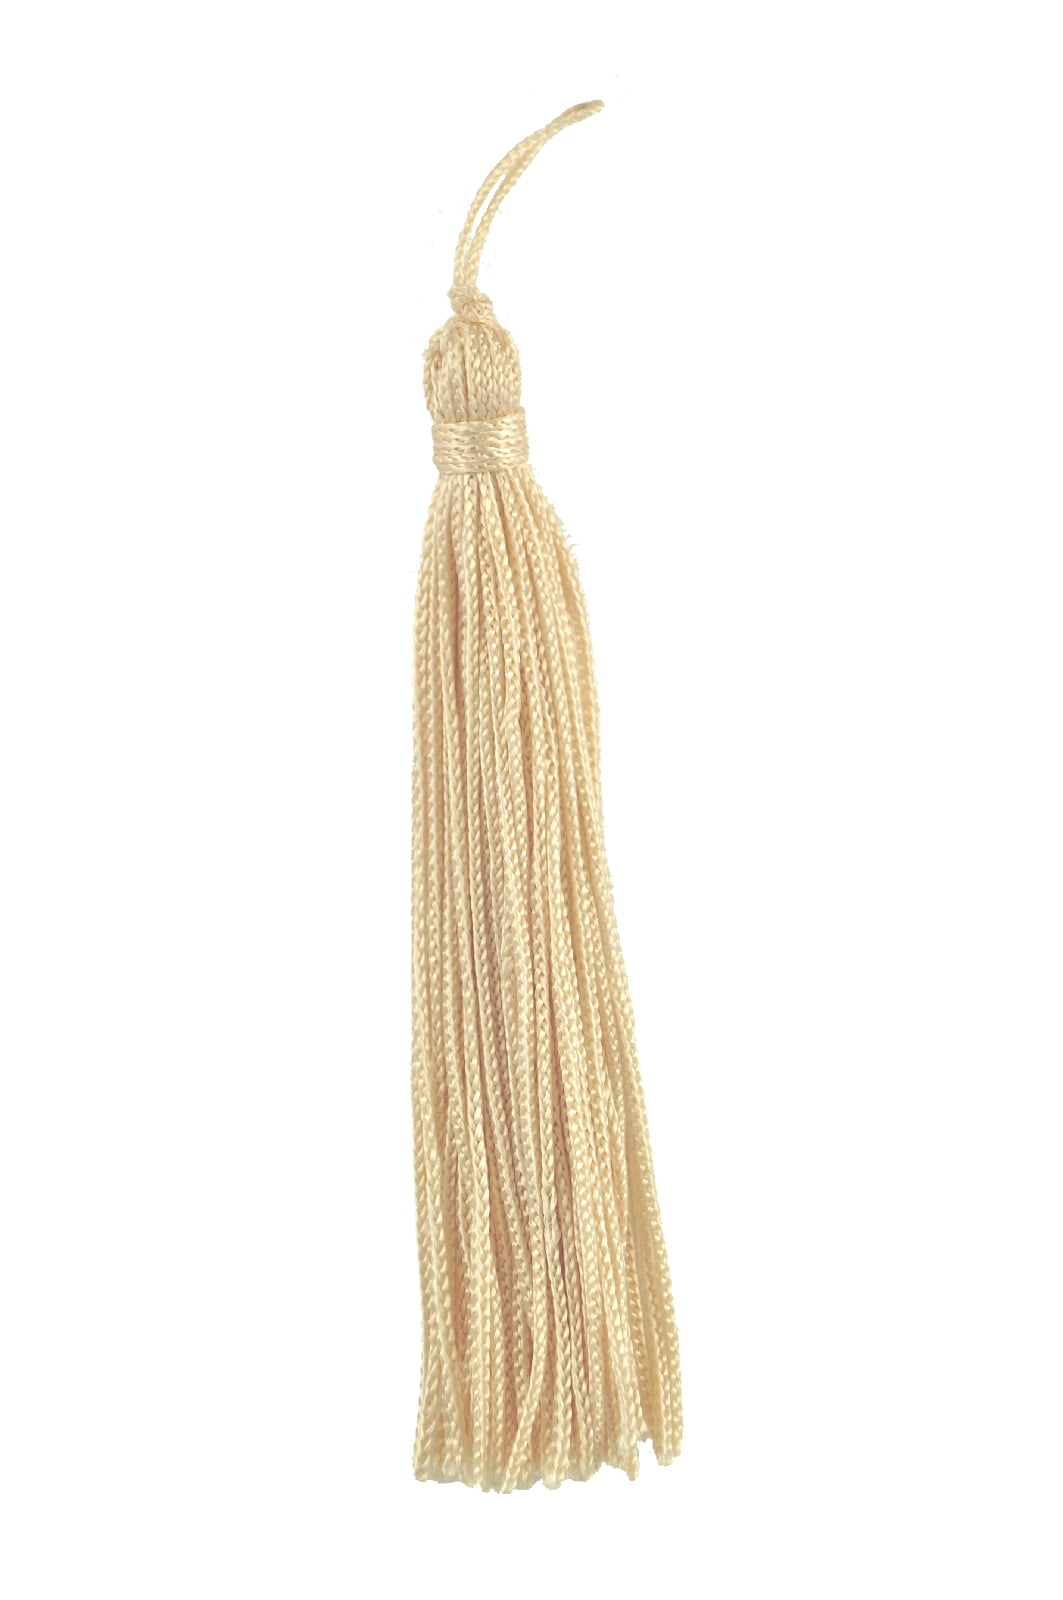 4" LIGHT GOLD CHAINETTE CROWN TASSELS LOT OF 12 